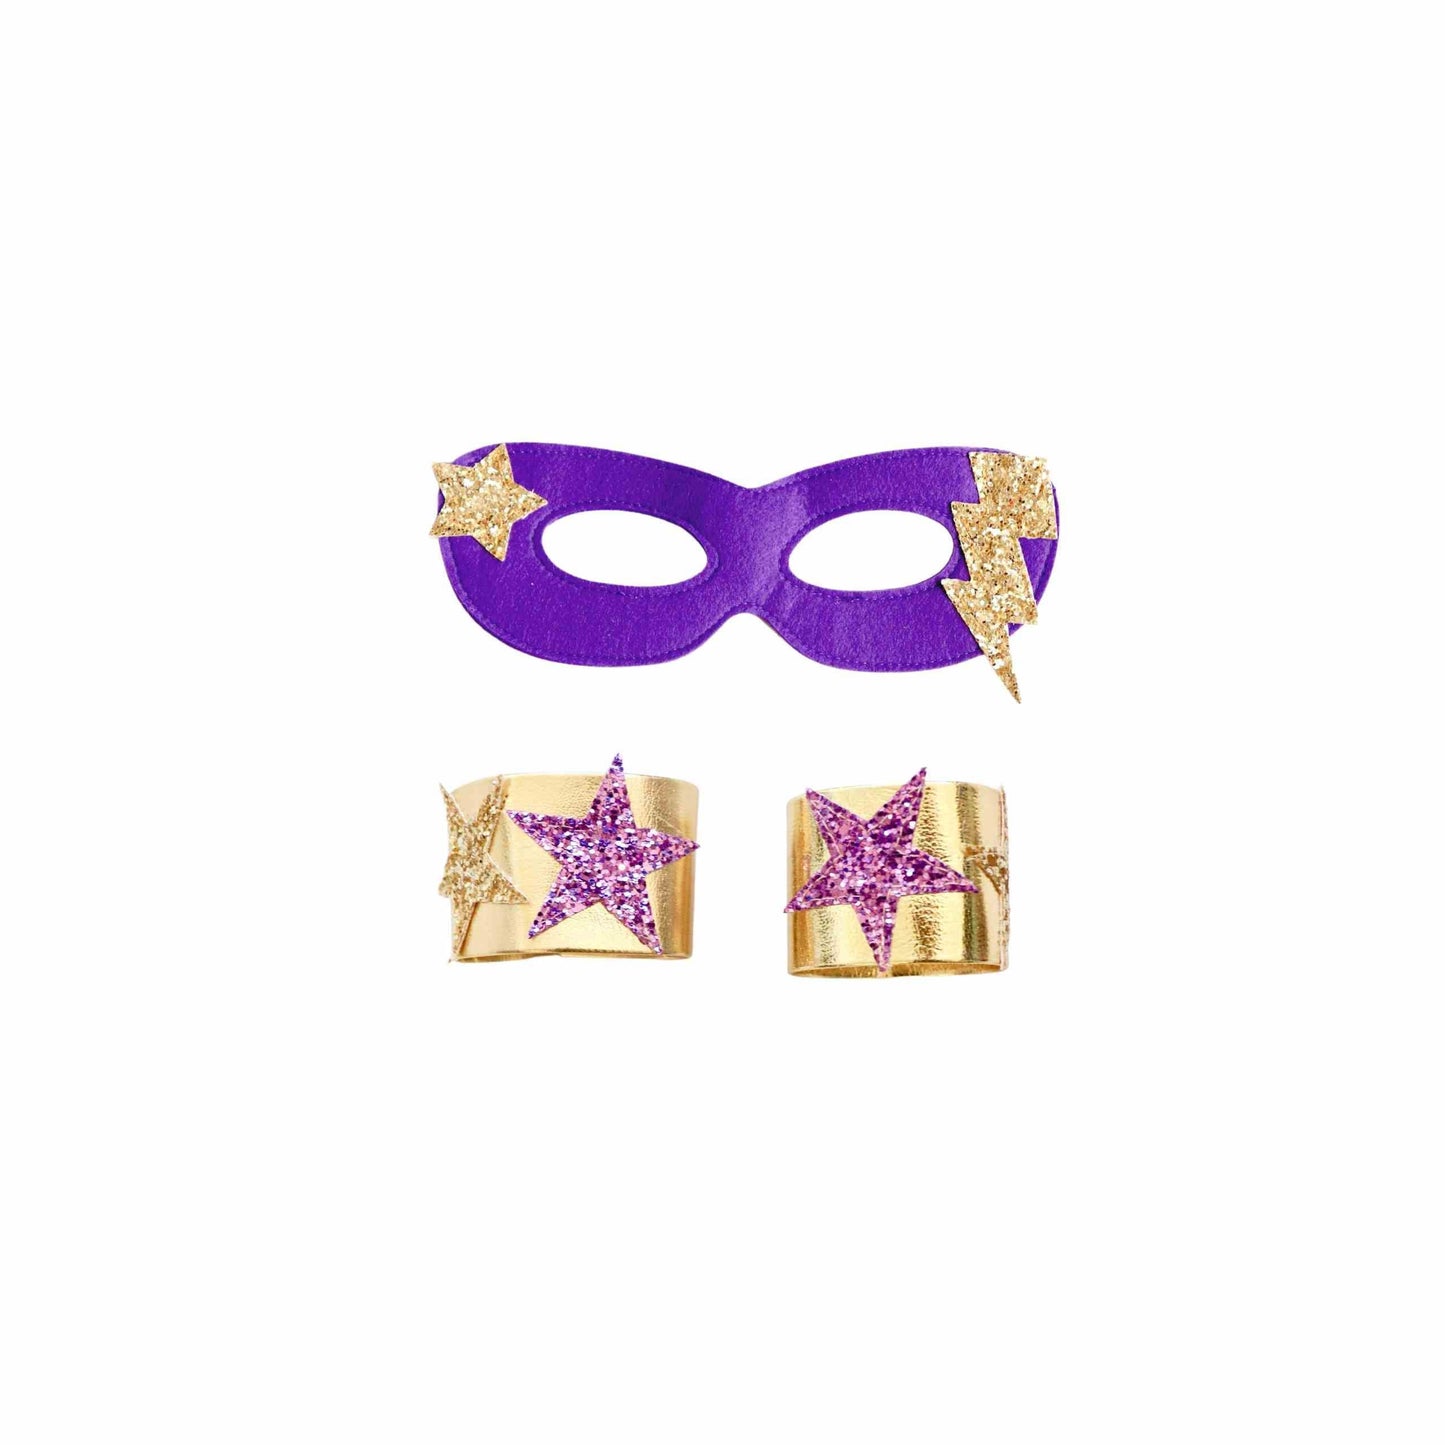 a pair of purple and gold earrings and a purple mask